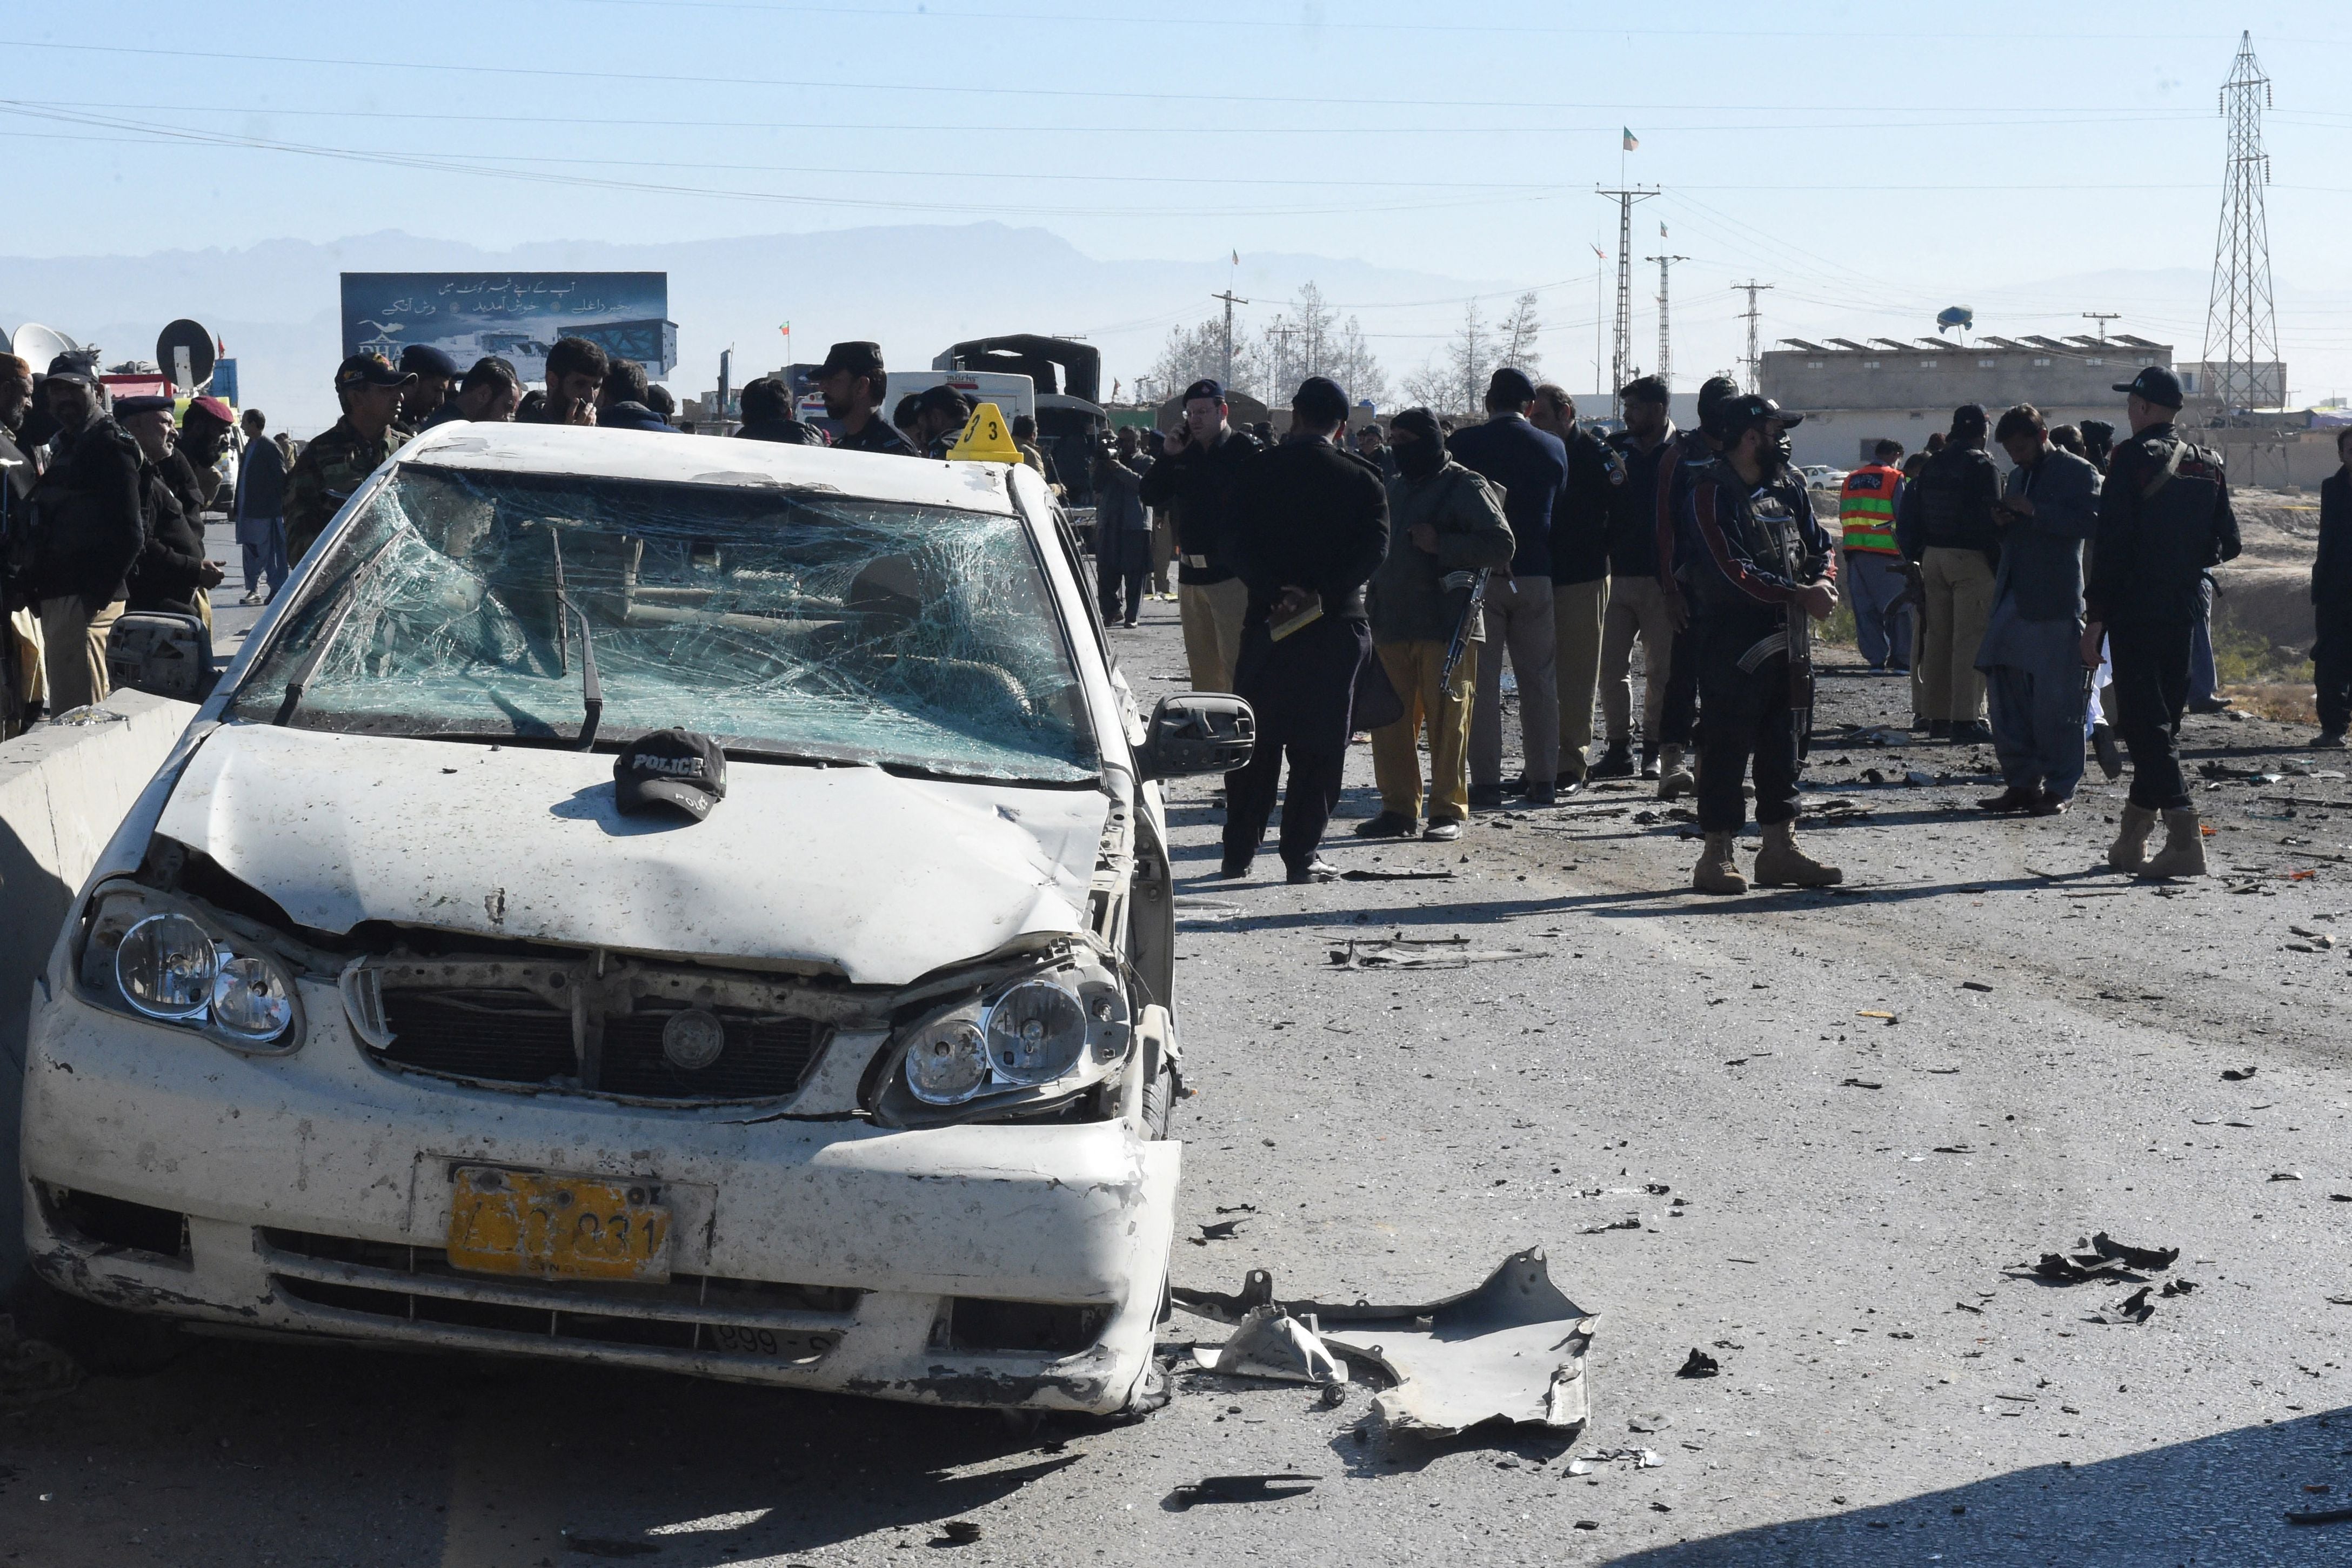 Security officials gather at the site of a suicide bomb attack targeting a police truck in Quetta on 30 November